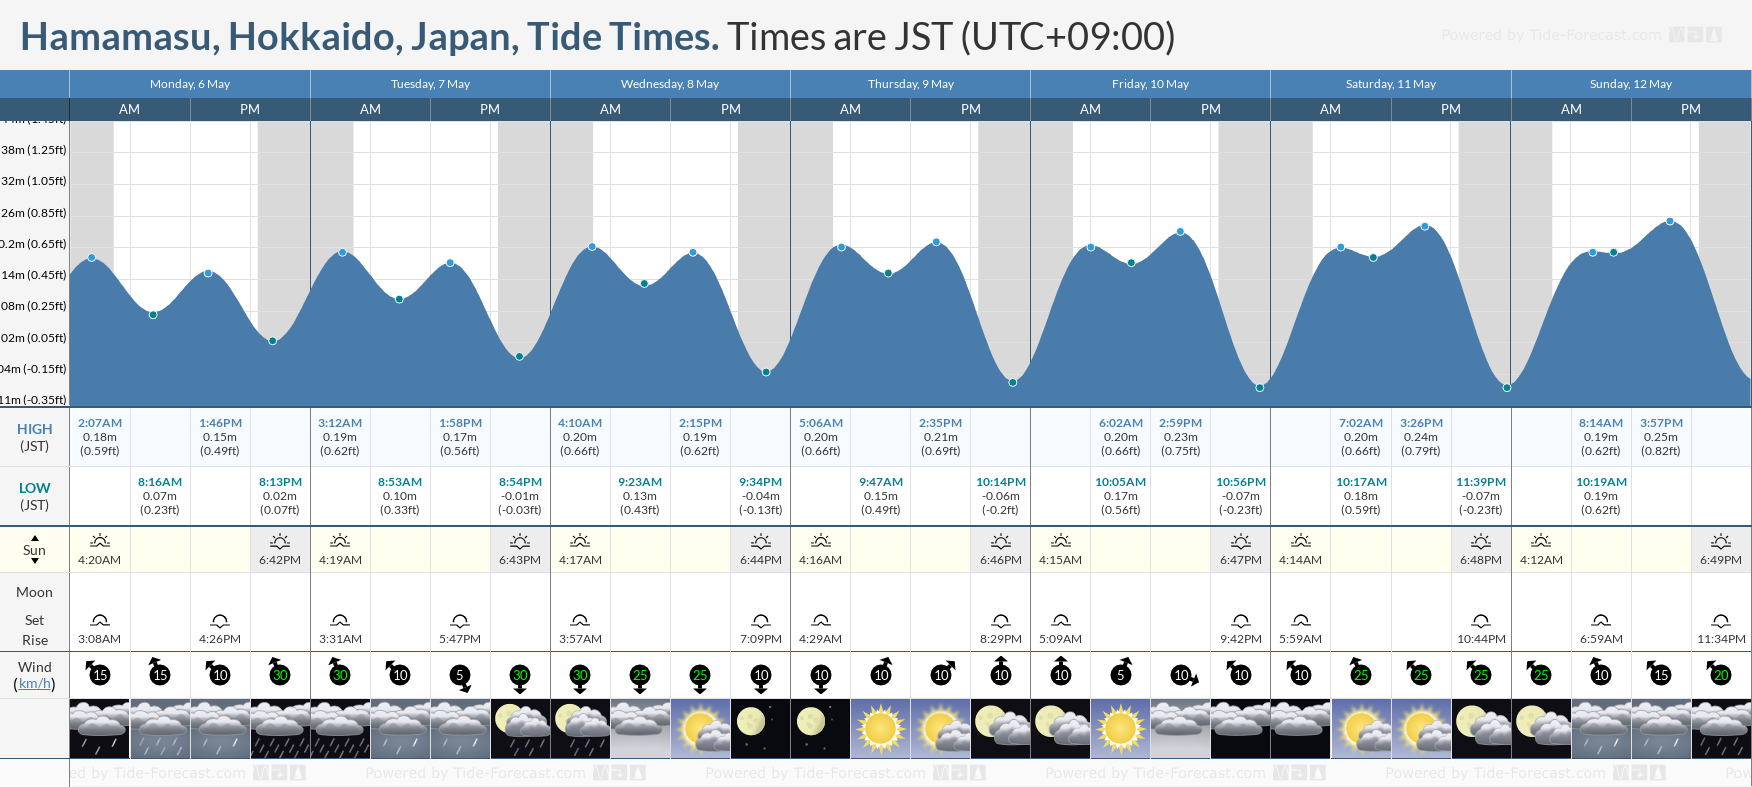 Hamamasu, Hokkaido, Japan Tide Chart including high and low tide tide times for the next 7 days